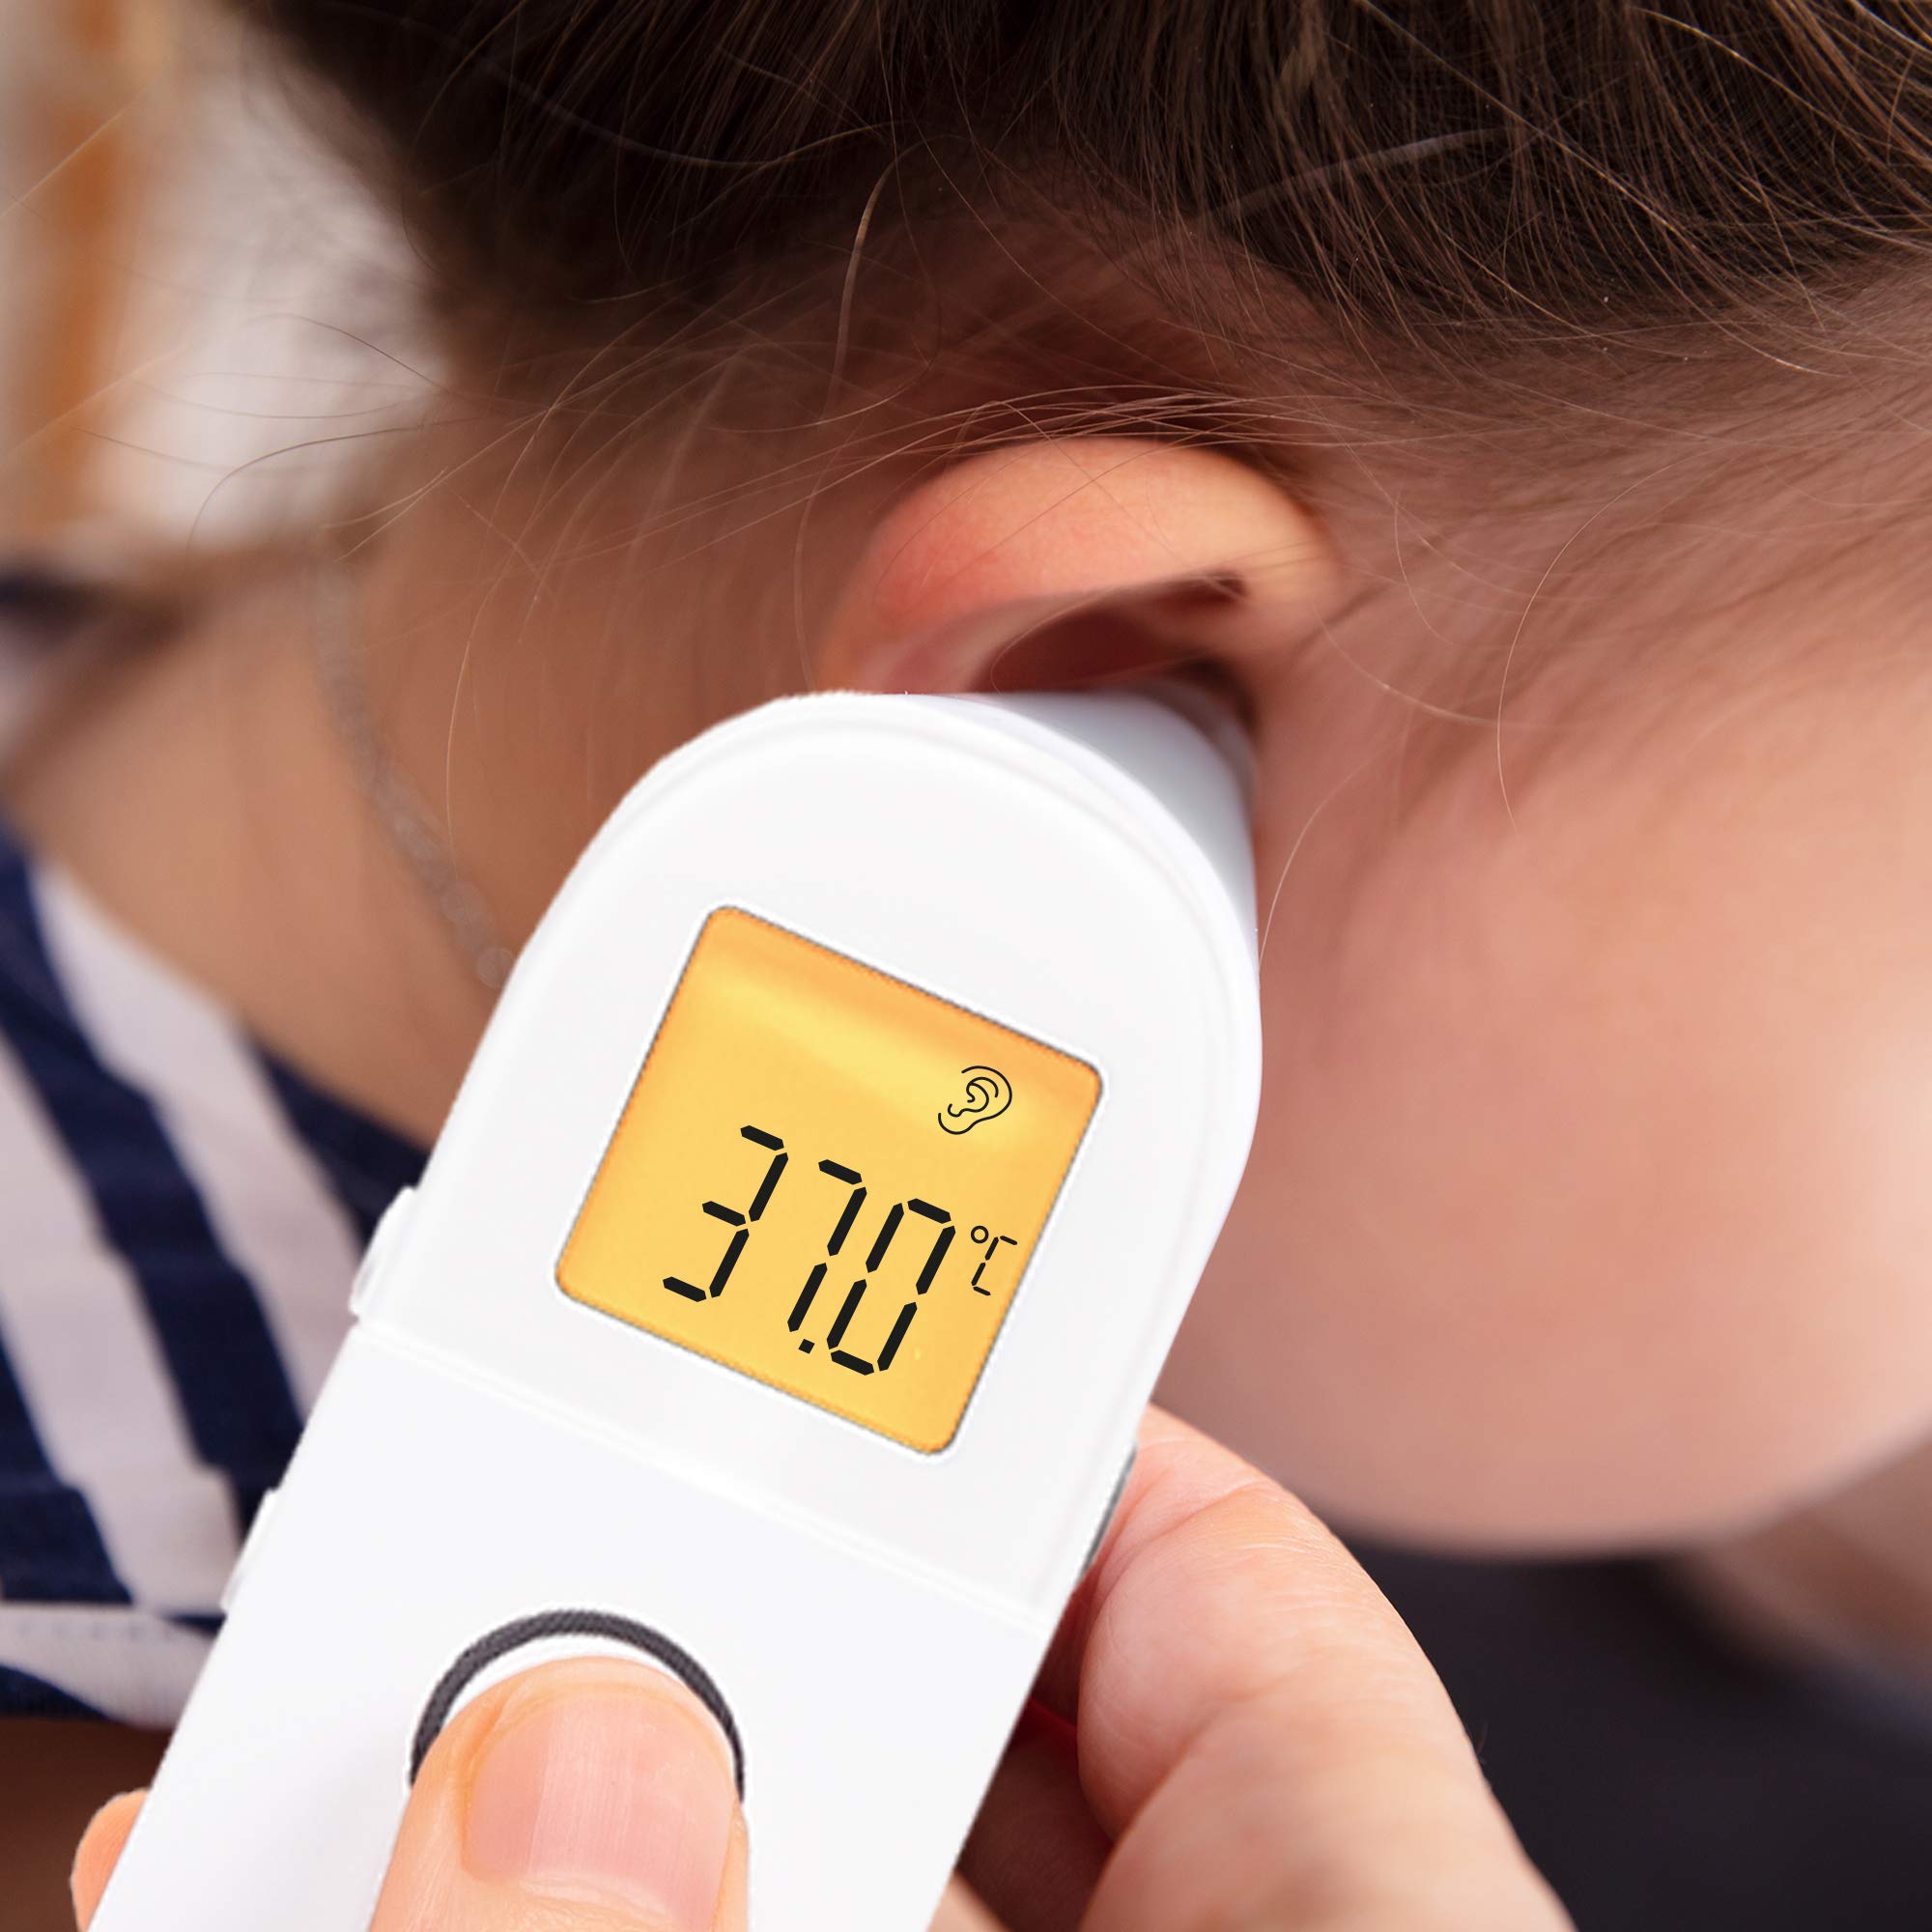 Duronic Ear and Forehead 3 in 1 Thermometer | Non-Contact Digital Infrared Medical Thermometer for Baby/Child/Adult & Objects | Easy Operation | Instant Accurate Results | Grey Pouch Included